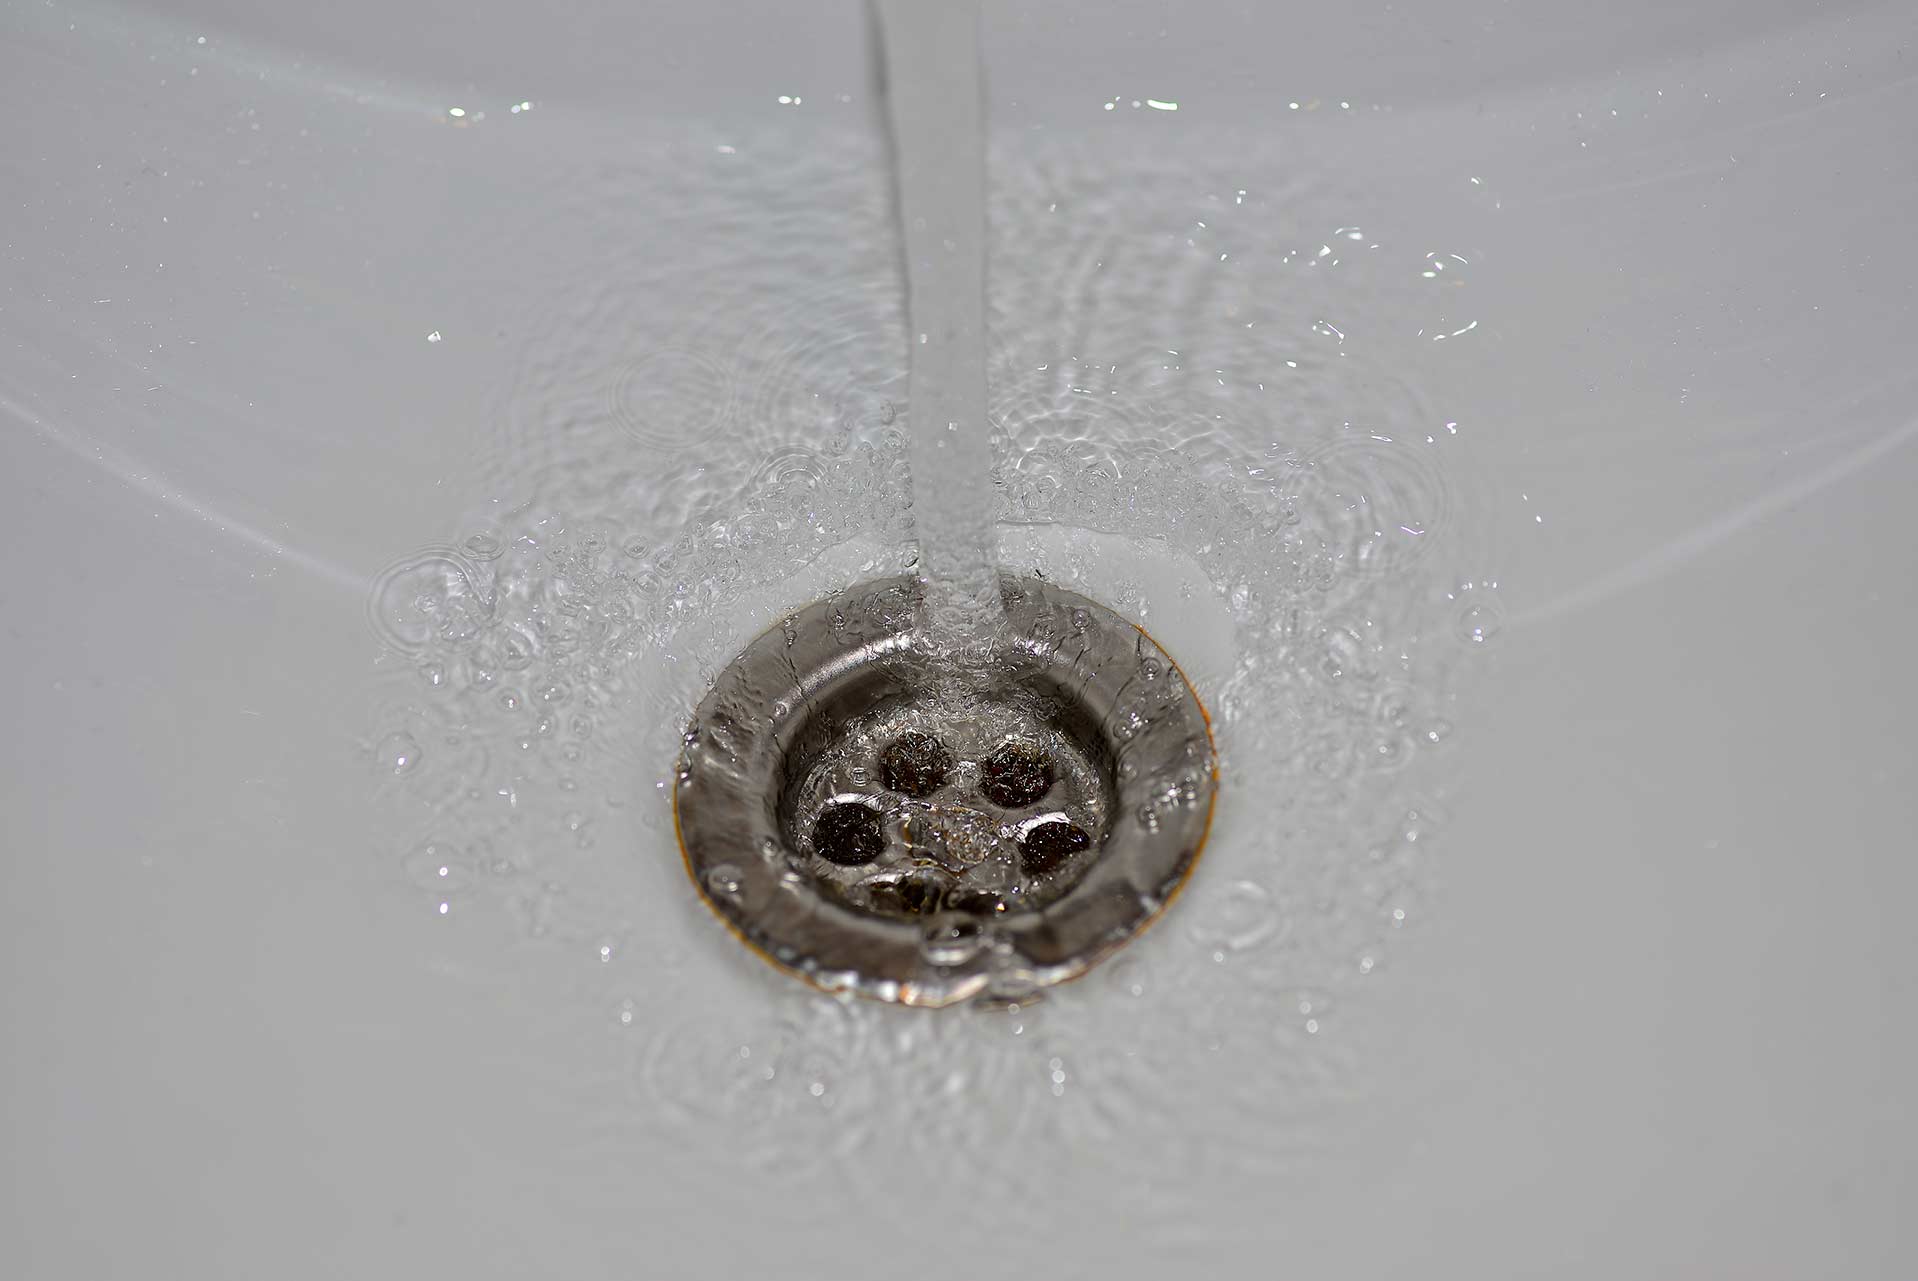 A2B Drains provides services to unblock blocked sinks and drains for properties in Dalston.